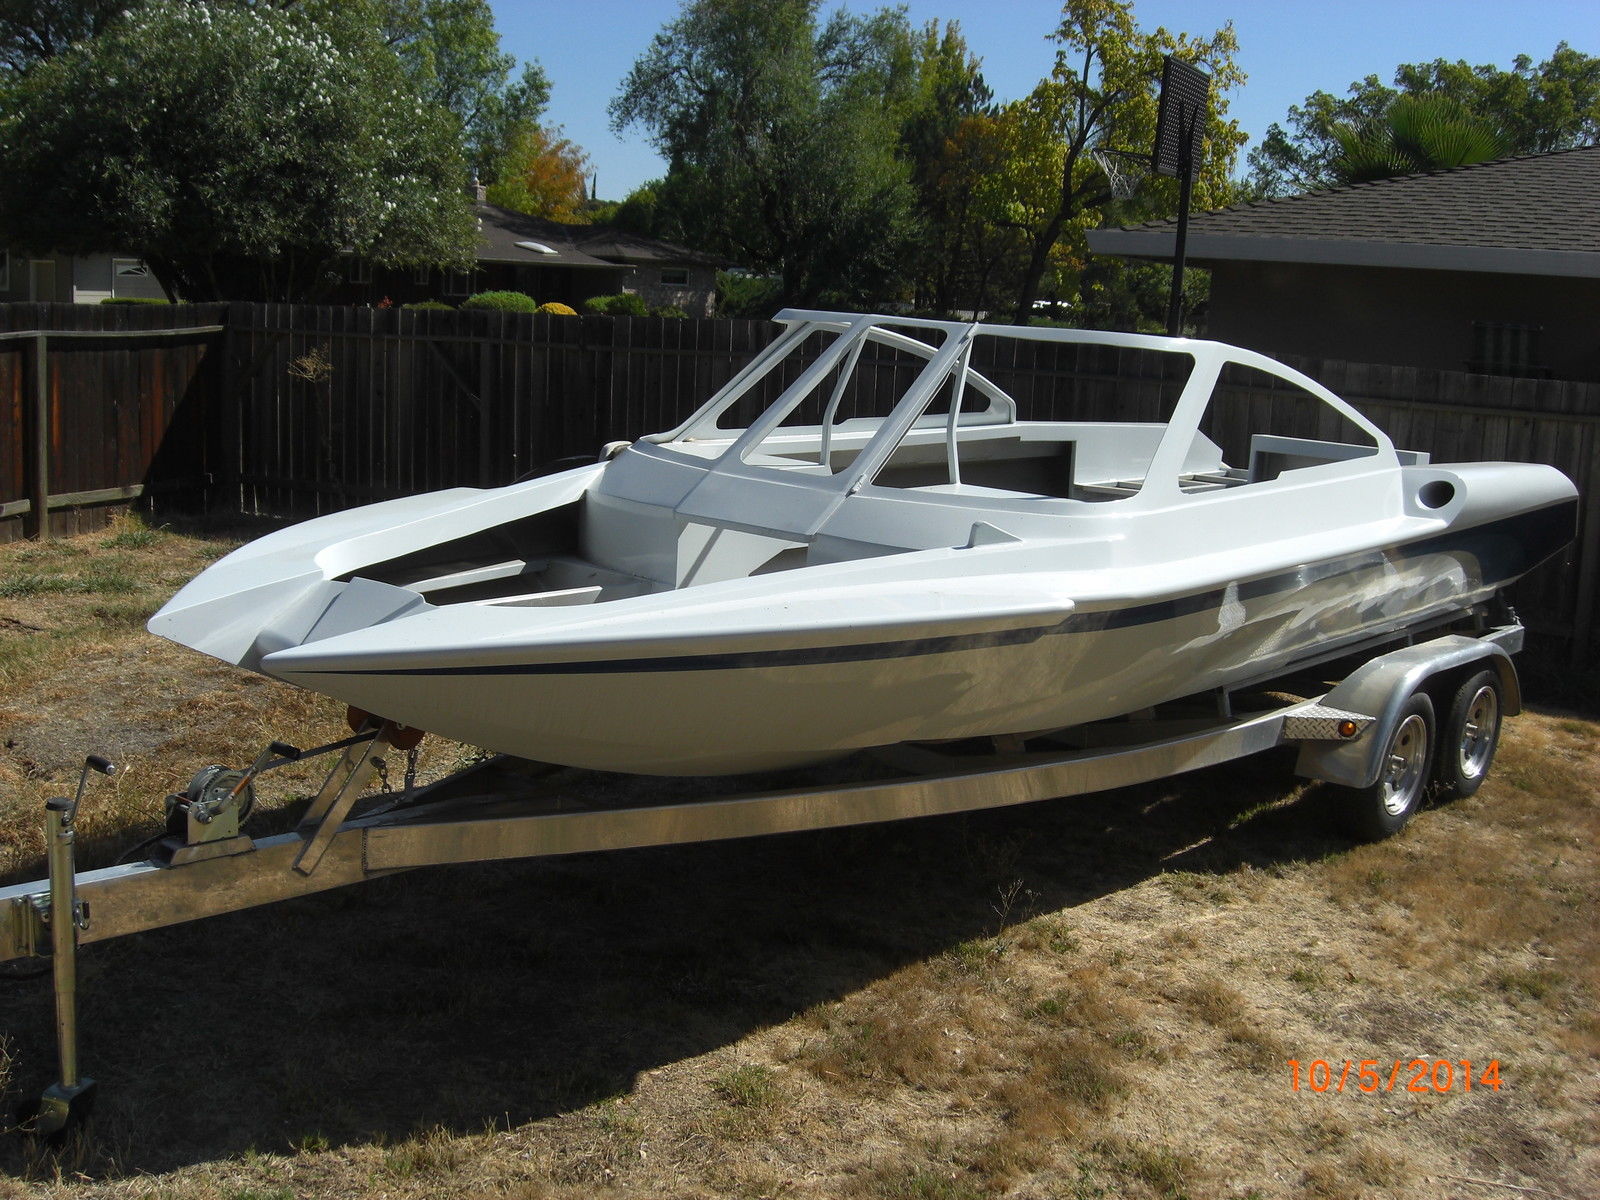 24' Boice Jet Boat 2015 for sale for $1 - Boats-from-USA.com